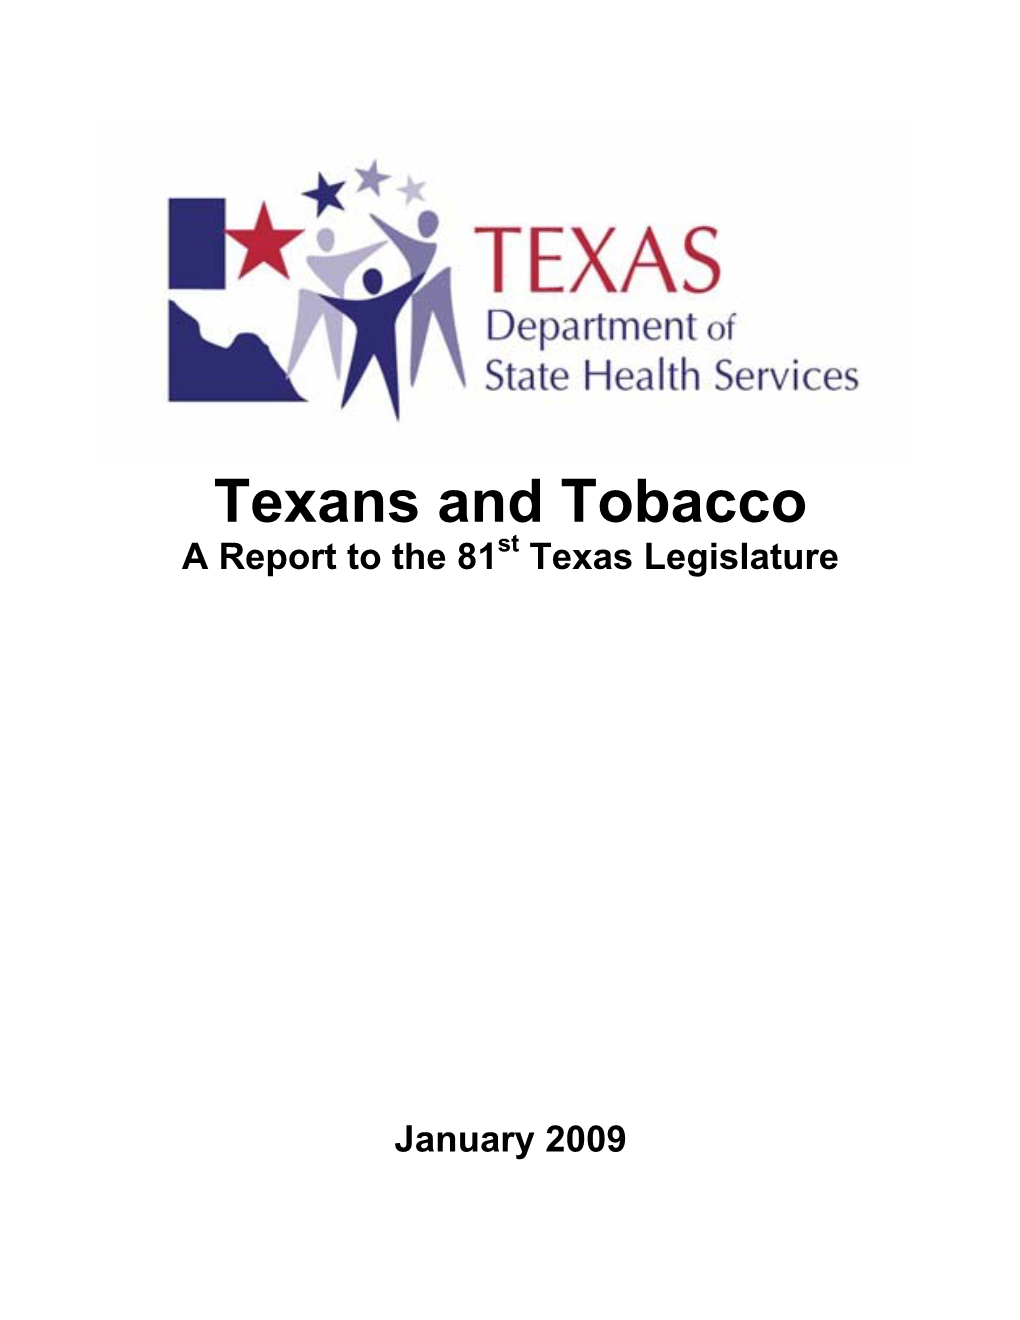 Texans and Tobacco Report